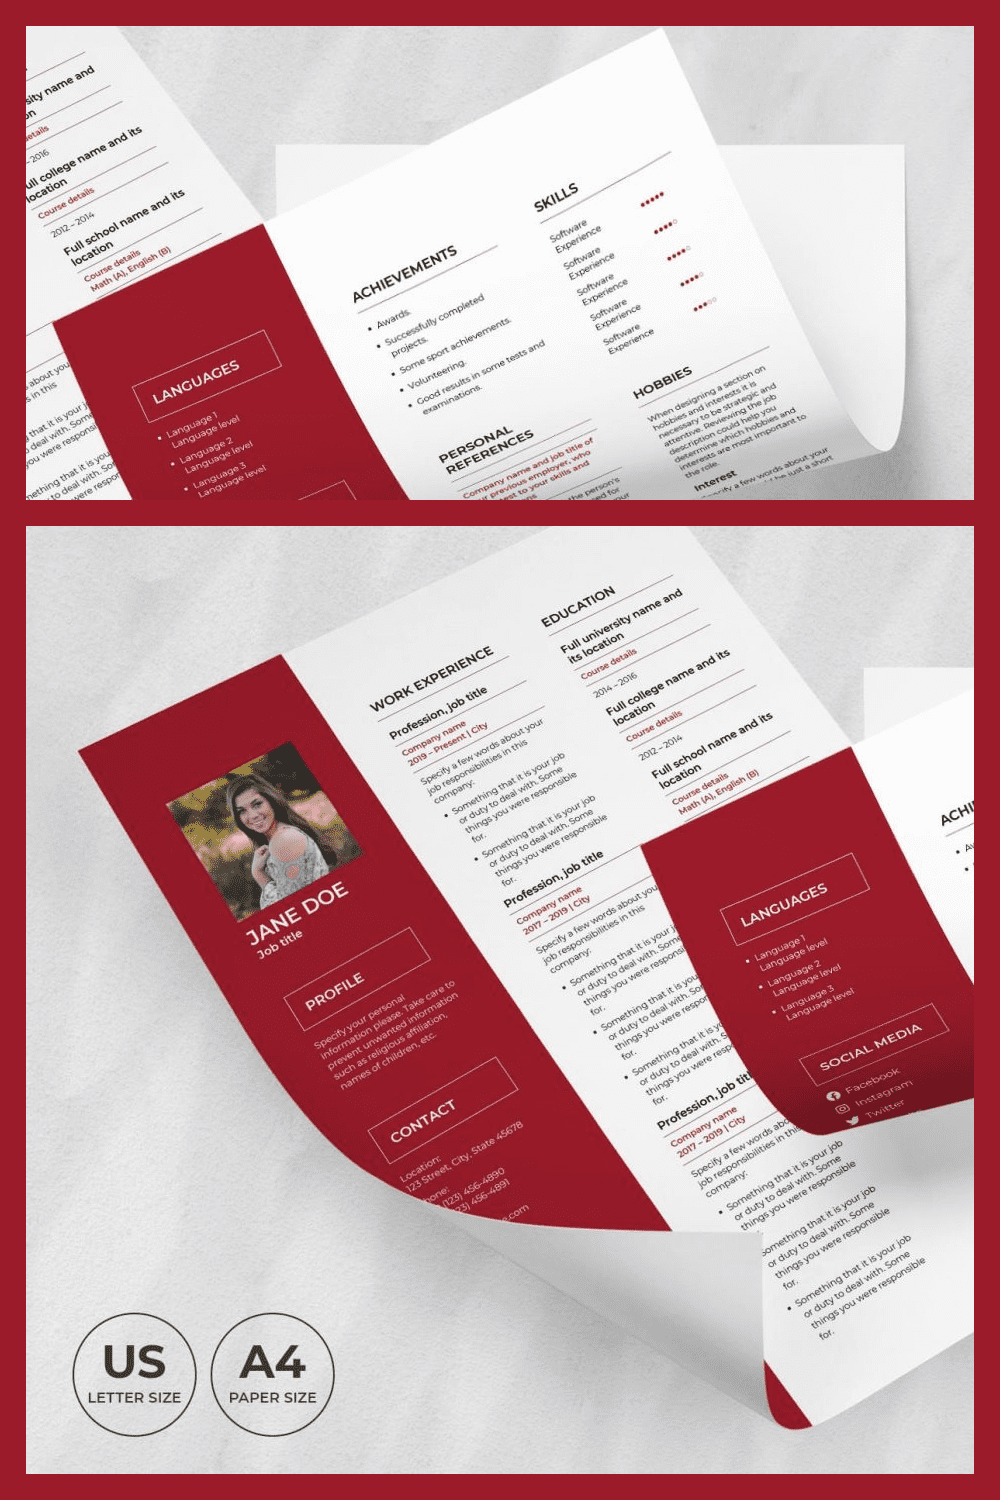 Two pages of a red and white resume.